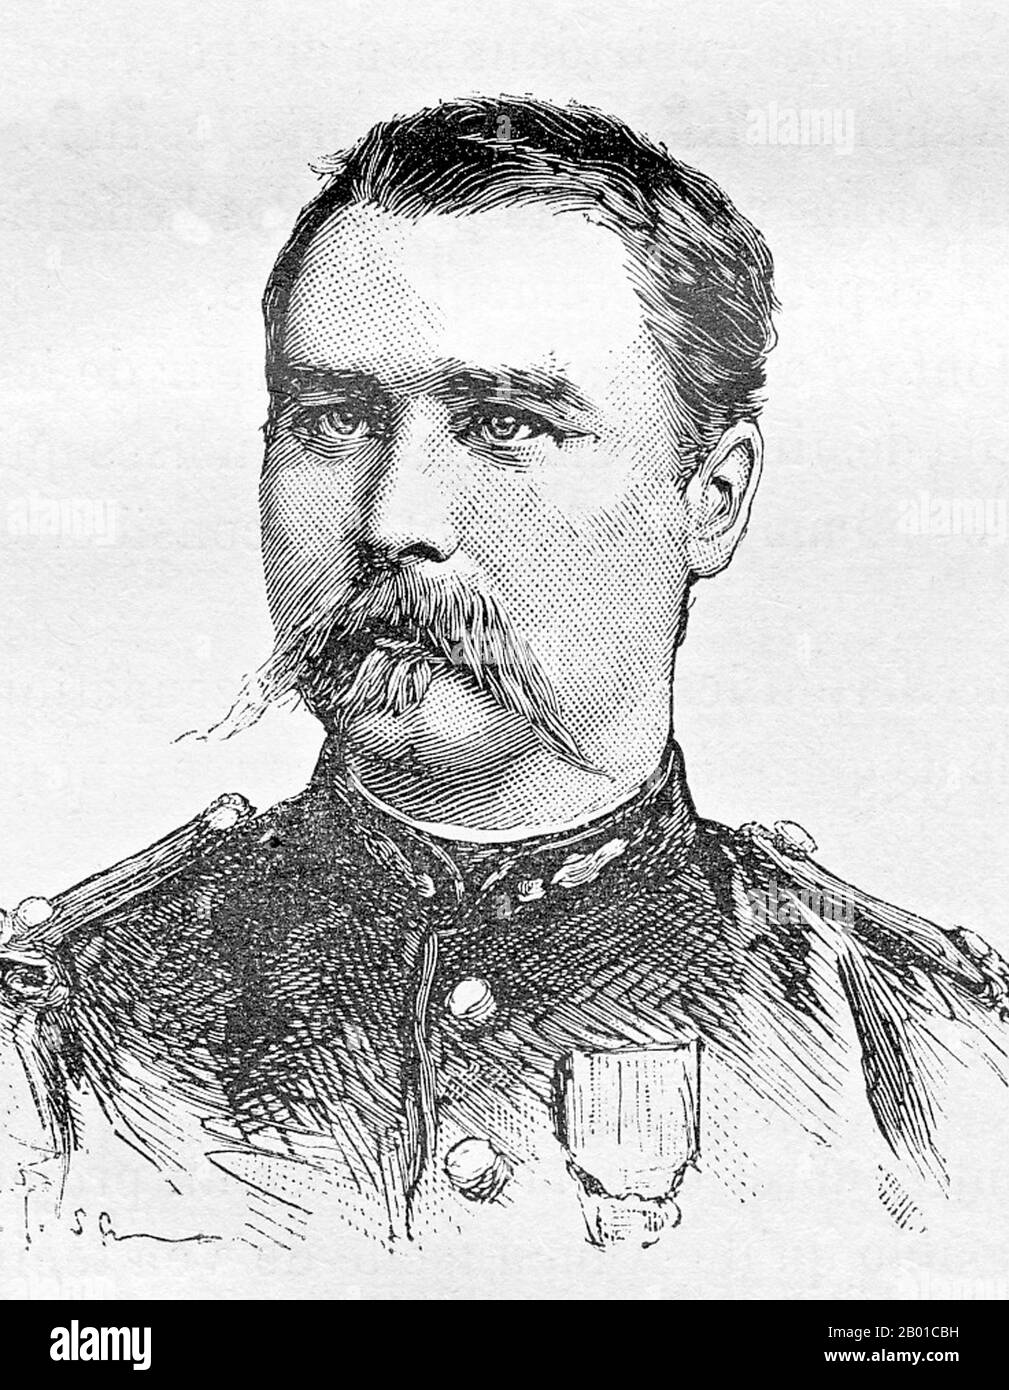 Vietnam: Captain Cotter, 2nd Foreign Legion Battalion, killed in action at Bang Bo, 24 March 1885. Lithograph portrait by Charles-Lucien Huard (12 February 1837 - 22 January 1899), 1887.  The Tonkin Campaign (French: Campagne du Tonkin) was an armed conflict fought between June 1883 and April 1886 by the French against, variously, the Vietnamese, Liu Yongfu's Black Flag Army and the Chinese Guangxi and Yunnan armies to occupy Tonkin (northern Vietnam) and entrench a French protectorate there. Stock Photo